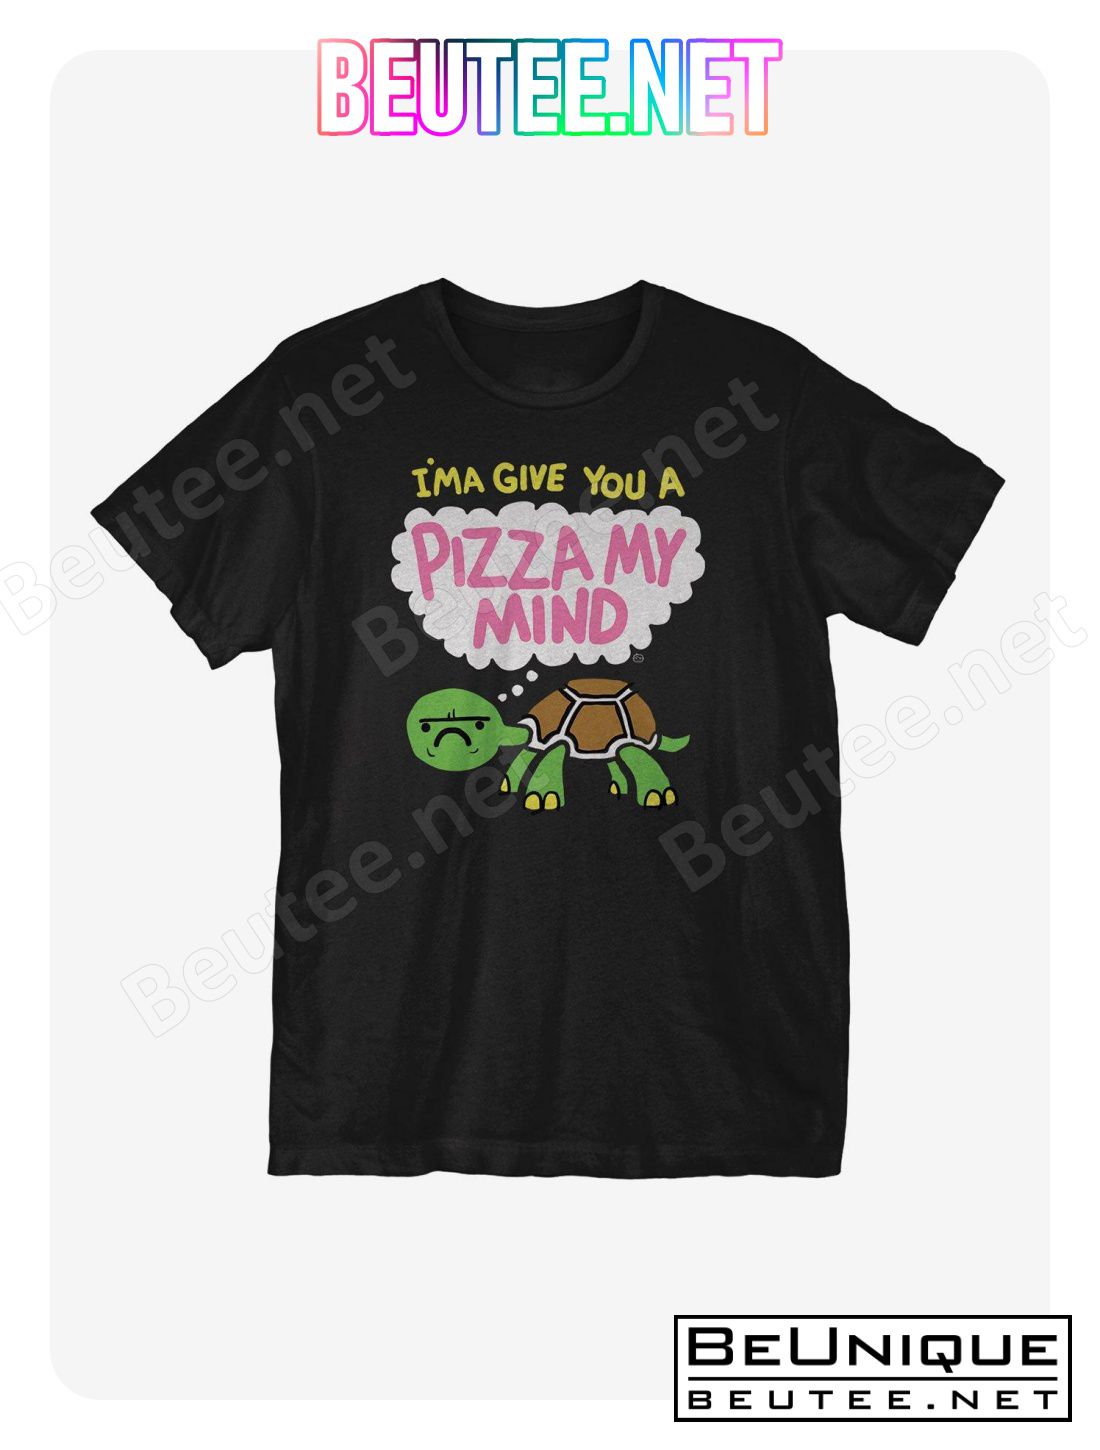 Give You A Pizza My Mind T-Shirt